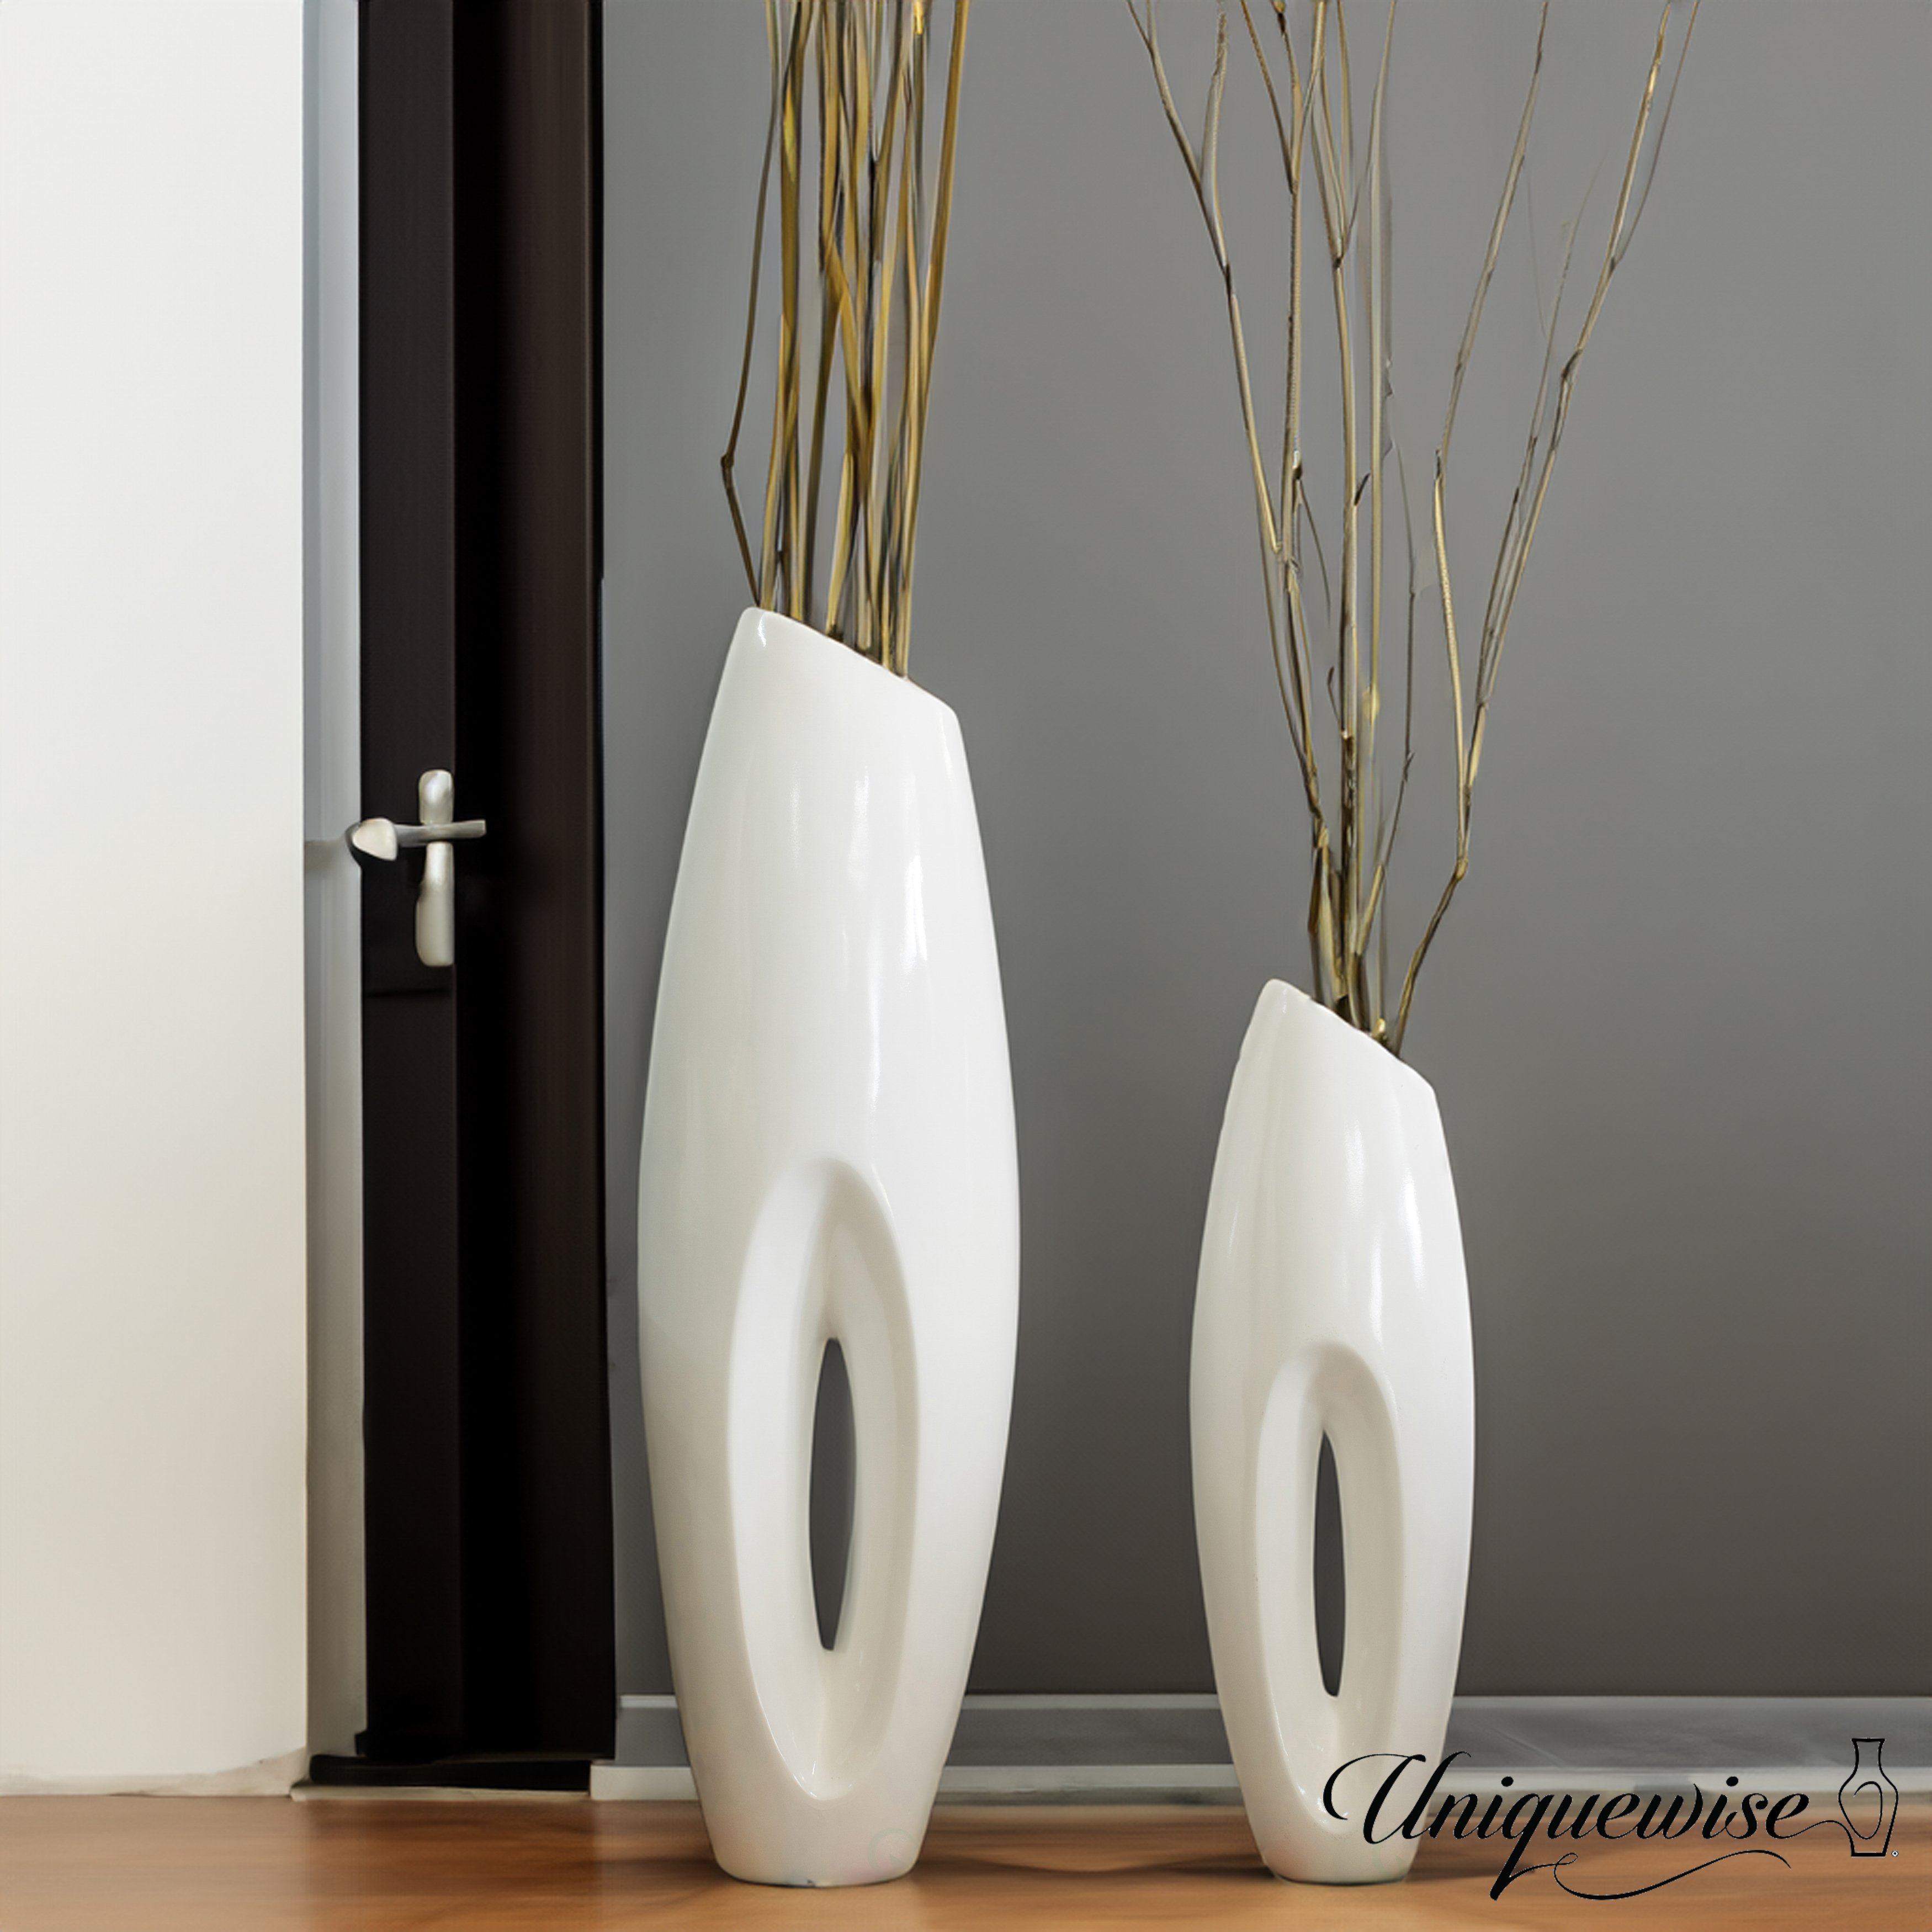 Tall Floor Vase, Modern White Large Floor Vase, Decorative Lightweight Vase, For The Entryway, Dining Room, Living Room - Small